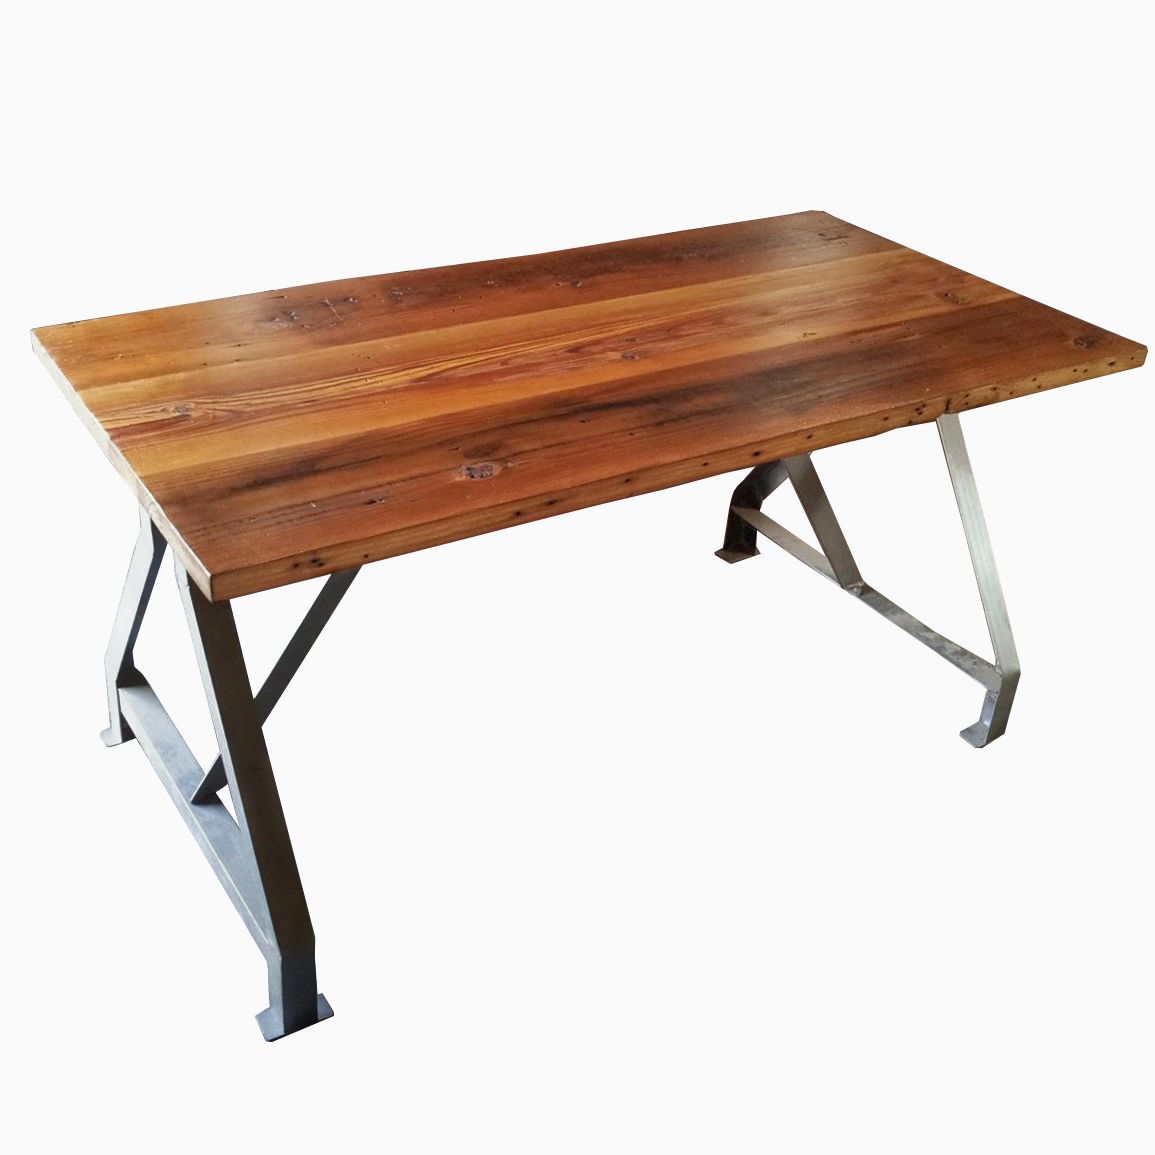 High table with metal base and aged wood top